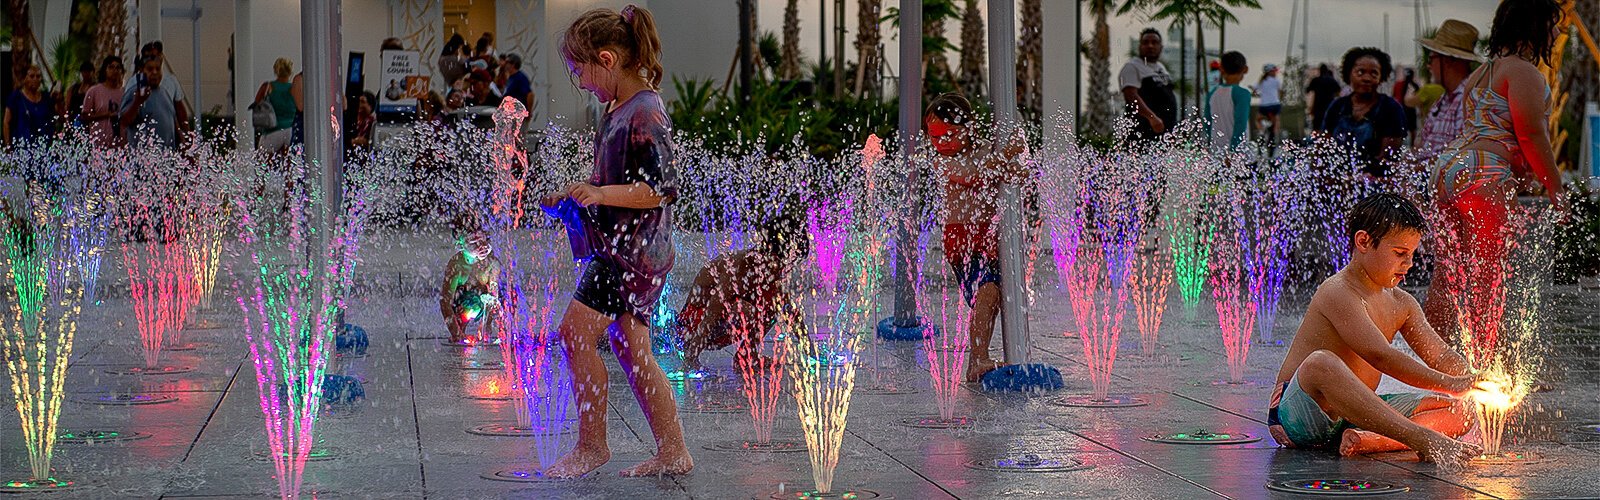 Children enjoy the cool and colorful fountains of the splash pad during the grand opening of the rebuilt Coachman Park in Clearwater.